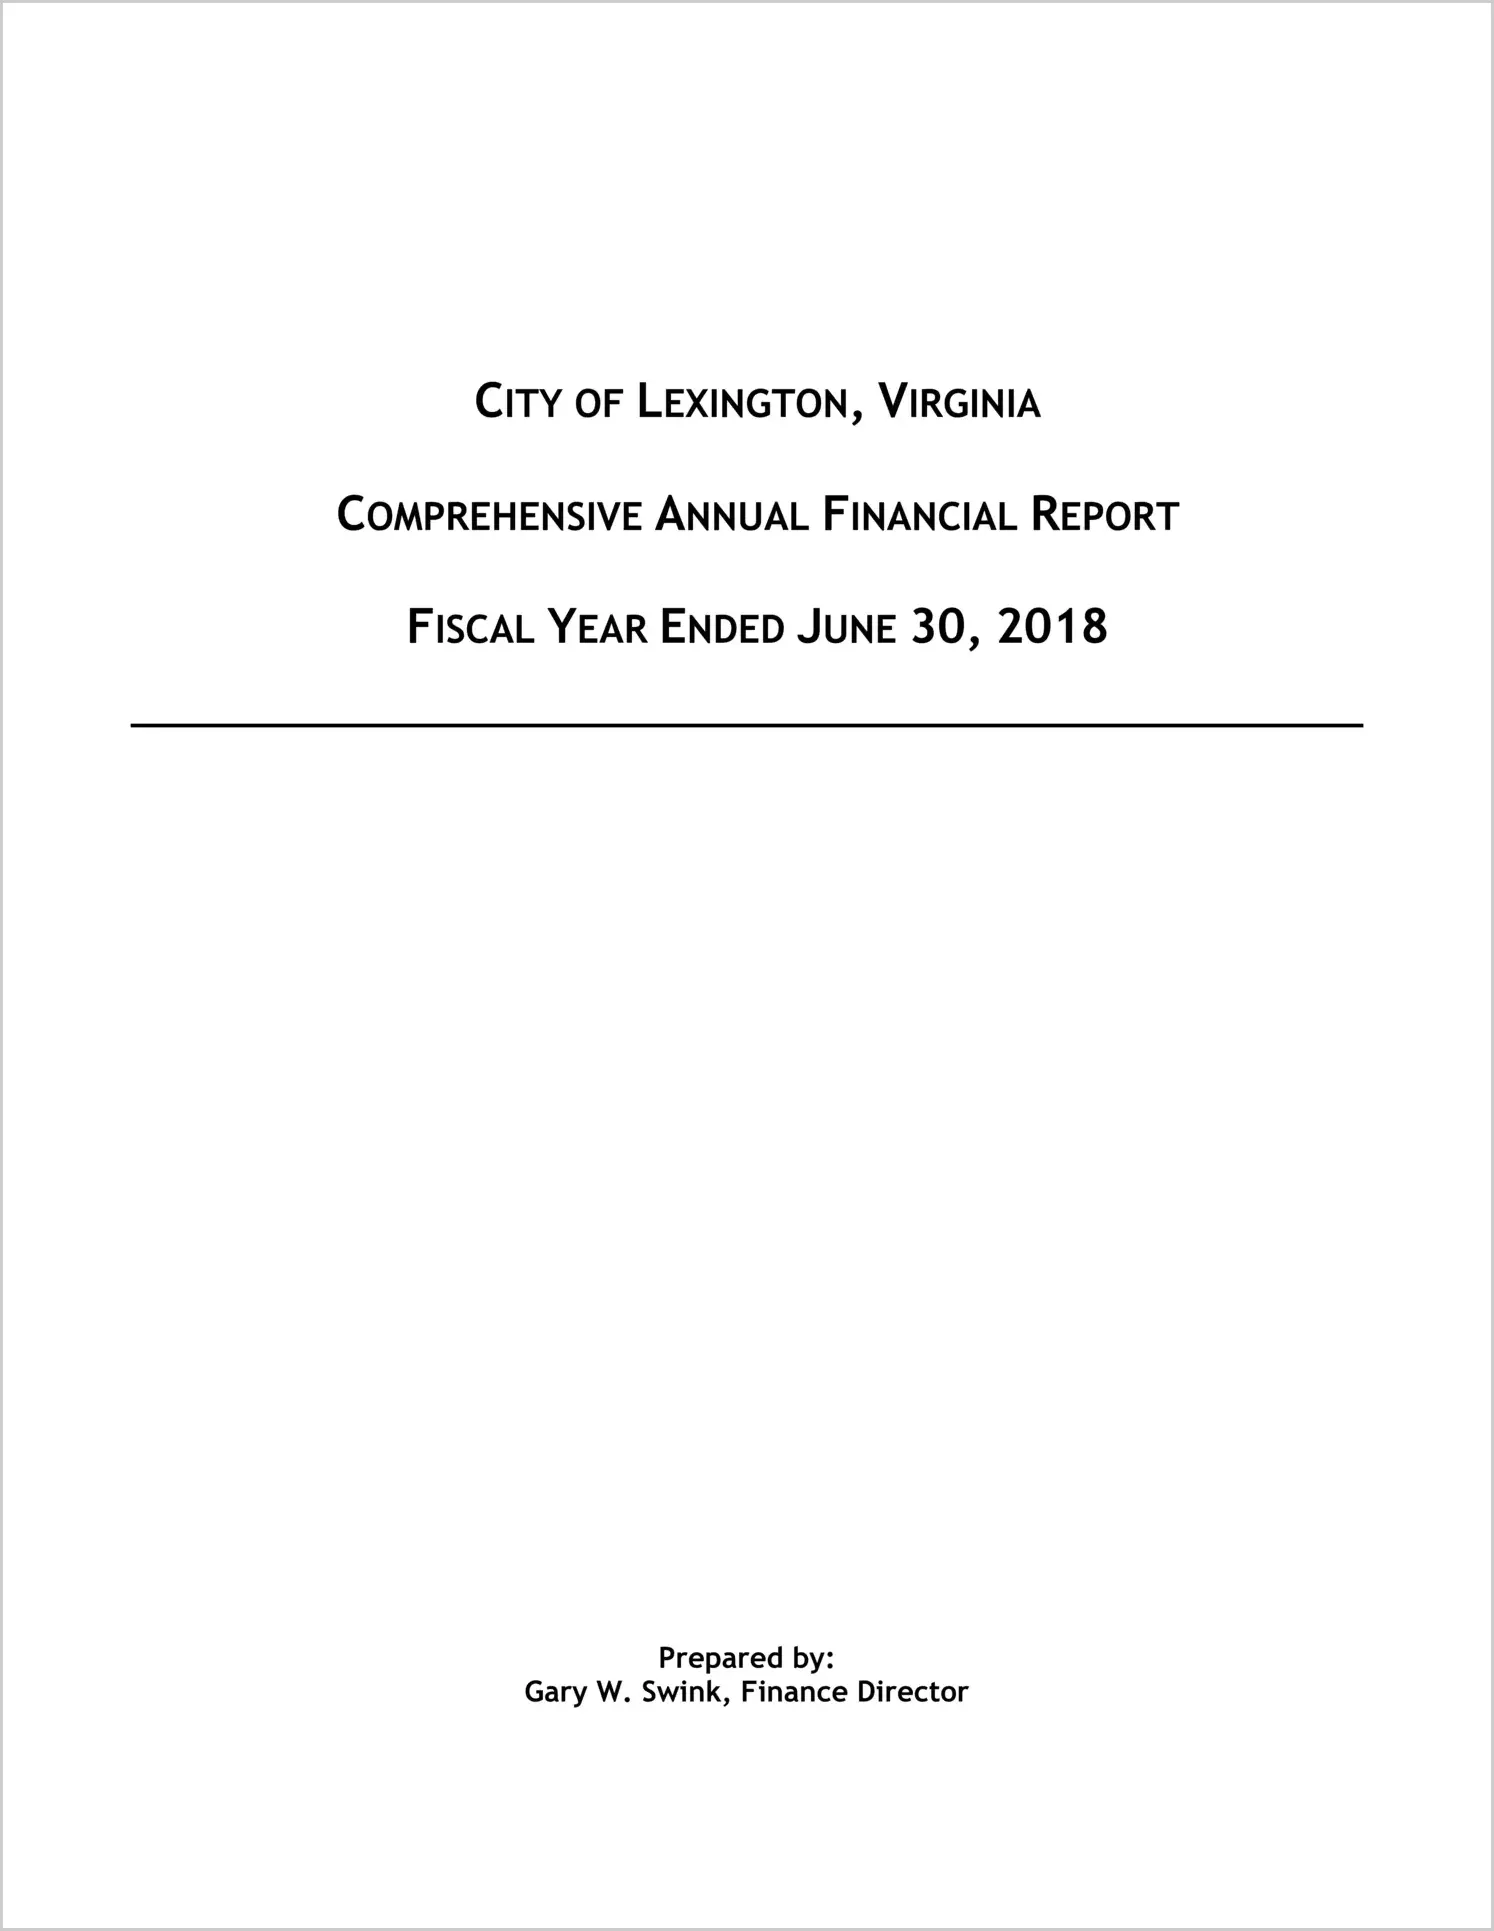 2018 Annual Financial Report for City of Lexington